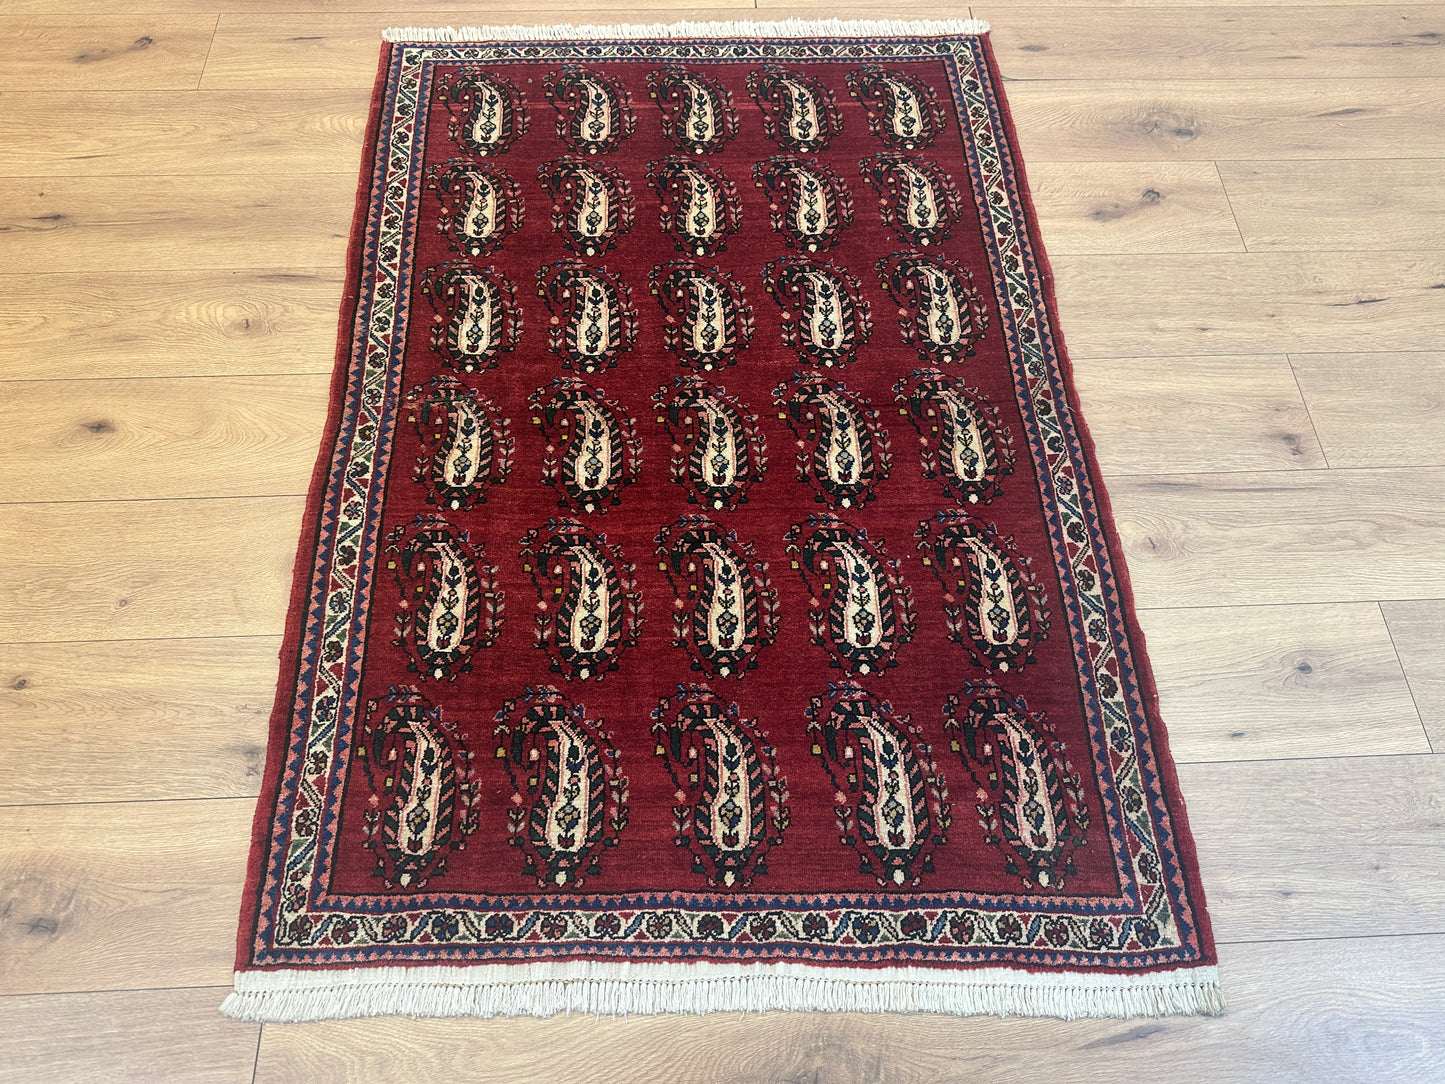 Handgeknüpfter Perser Orientteppich  Abadoeh Bote Muster Wolle 150x105cm